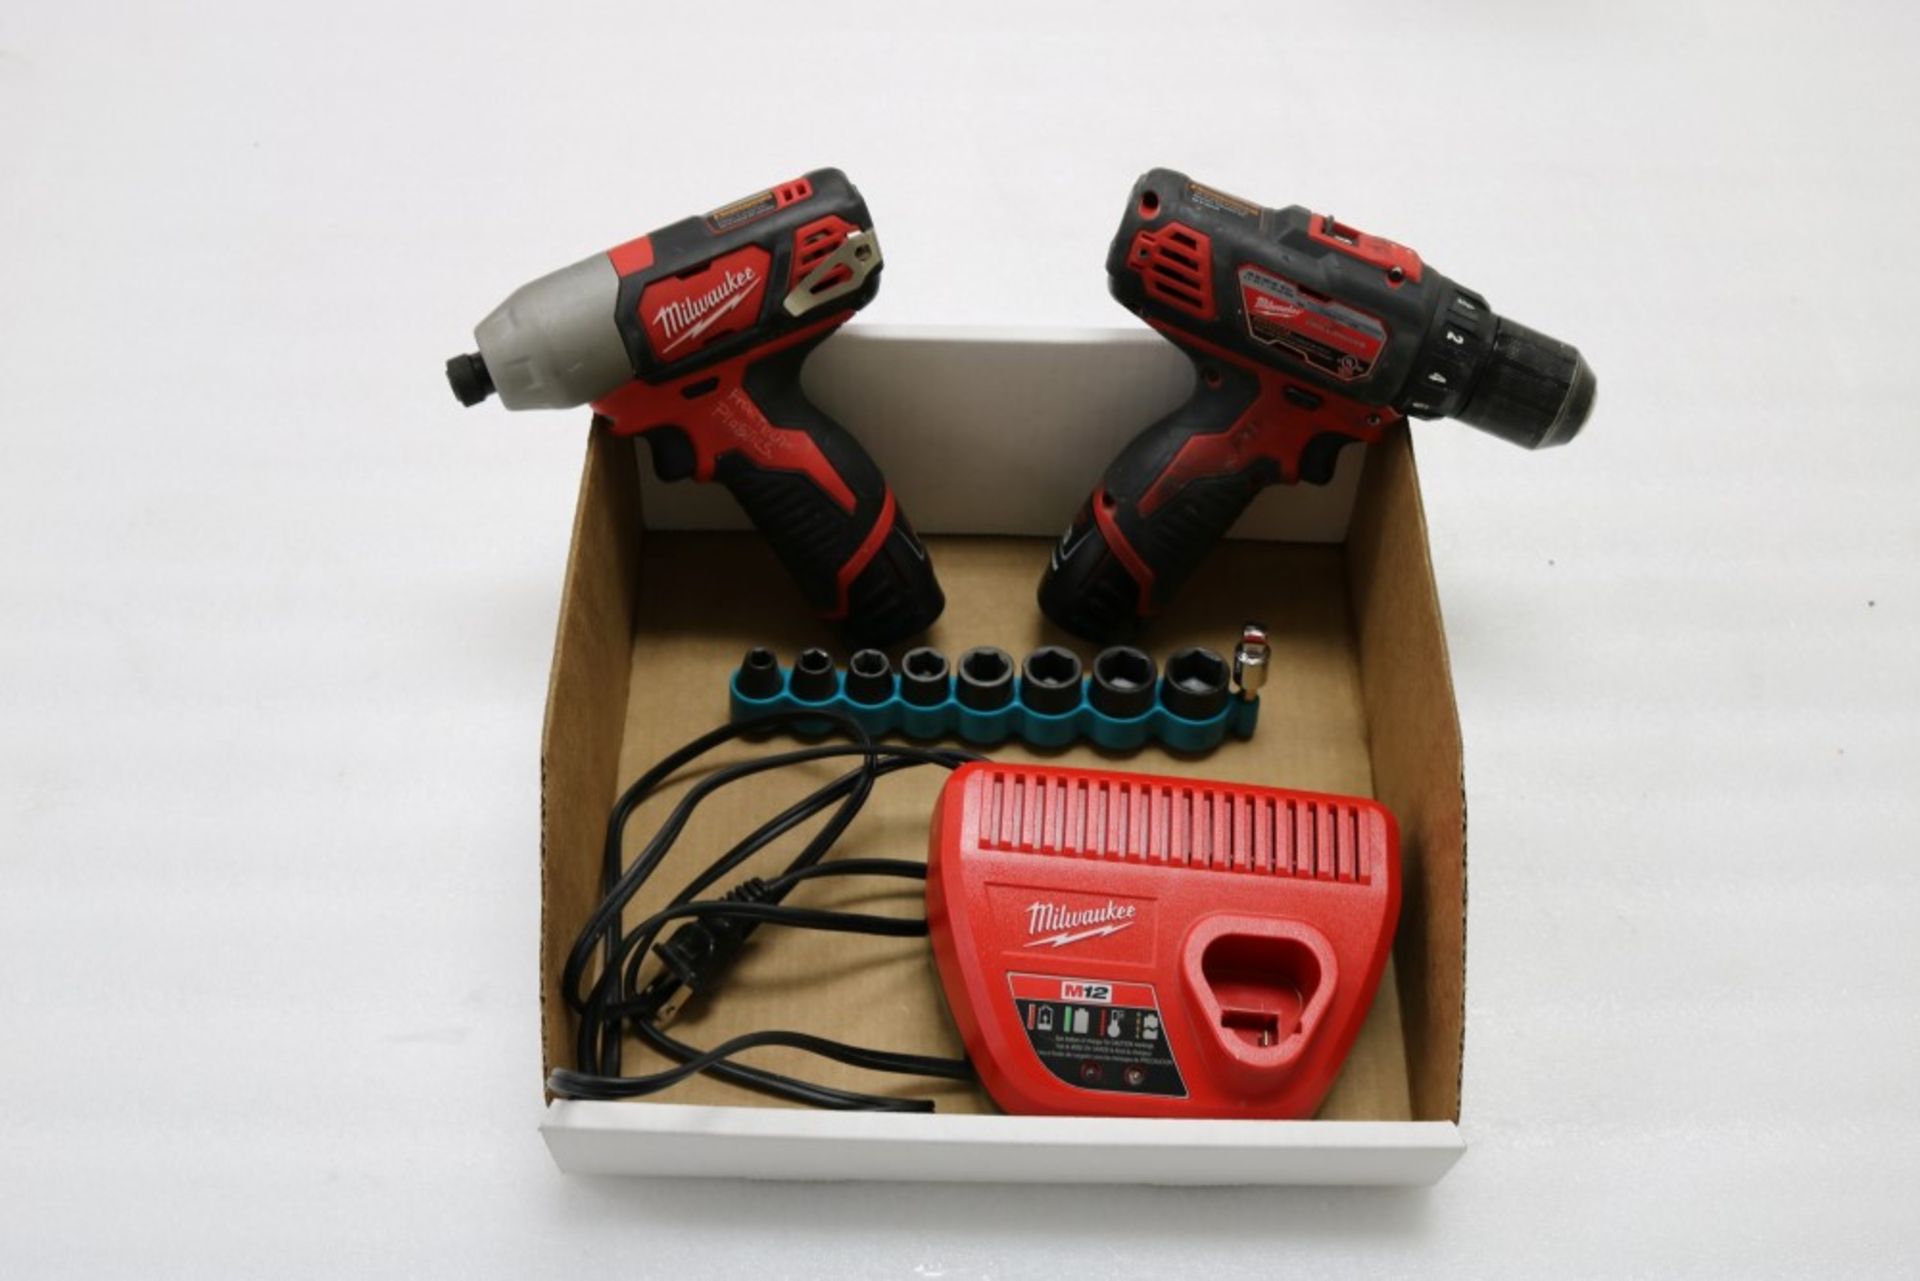 Milwaukee 1/4" Hex Impact Driver Cordless, Milwaukee 3/8" Drill Driver Cordless, Charging Station